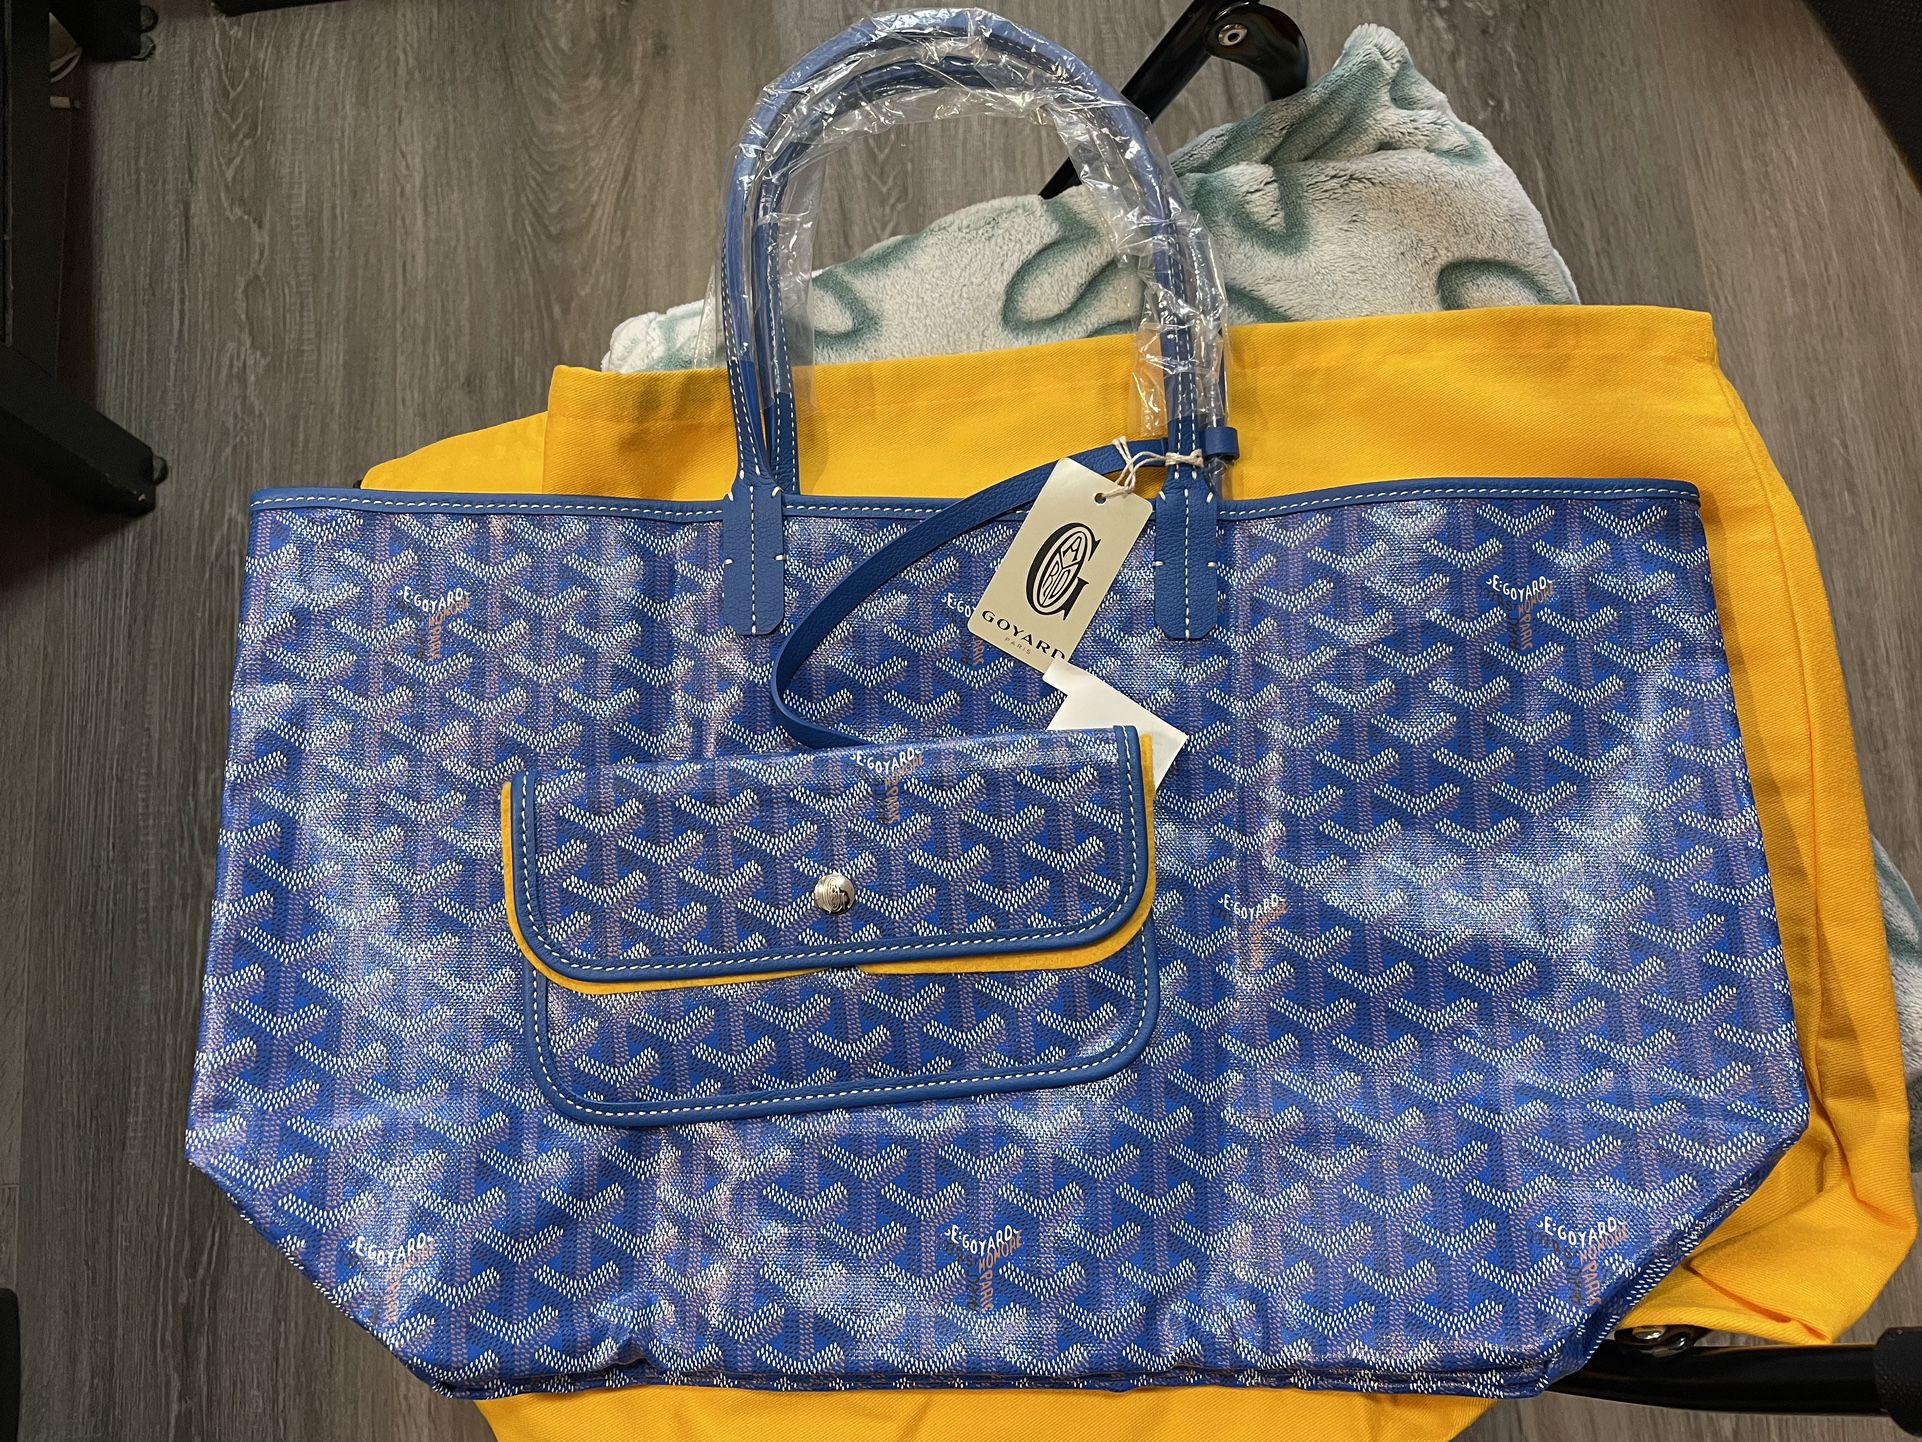 New Authentic Goyard Saint Louis GM Black/Tan Tote Bag for Sale in Rolling  Hills, CA - OfferUp